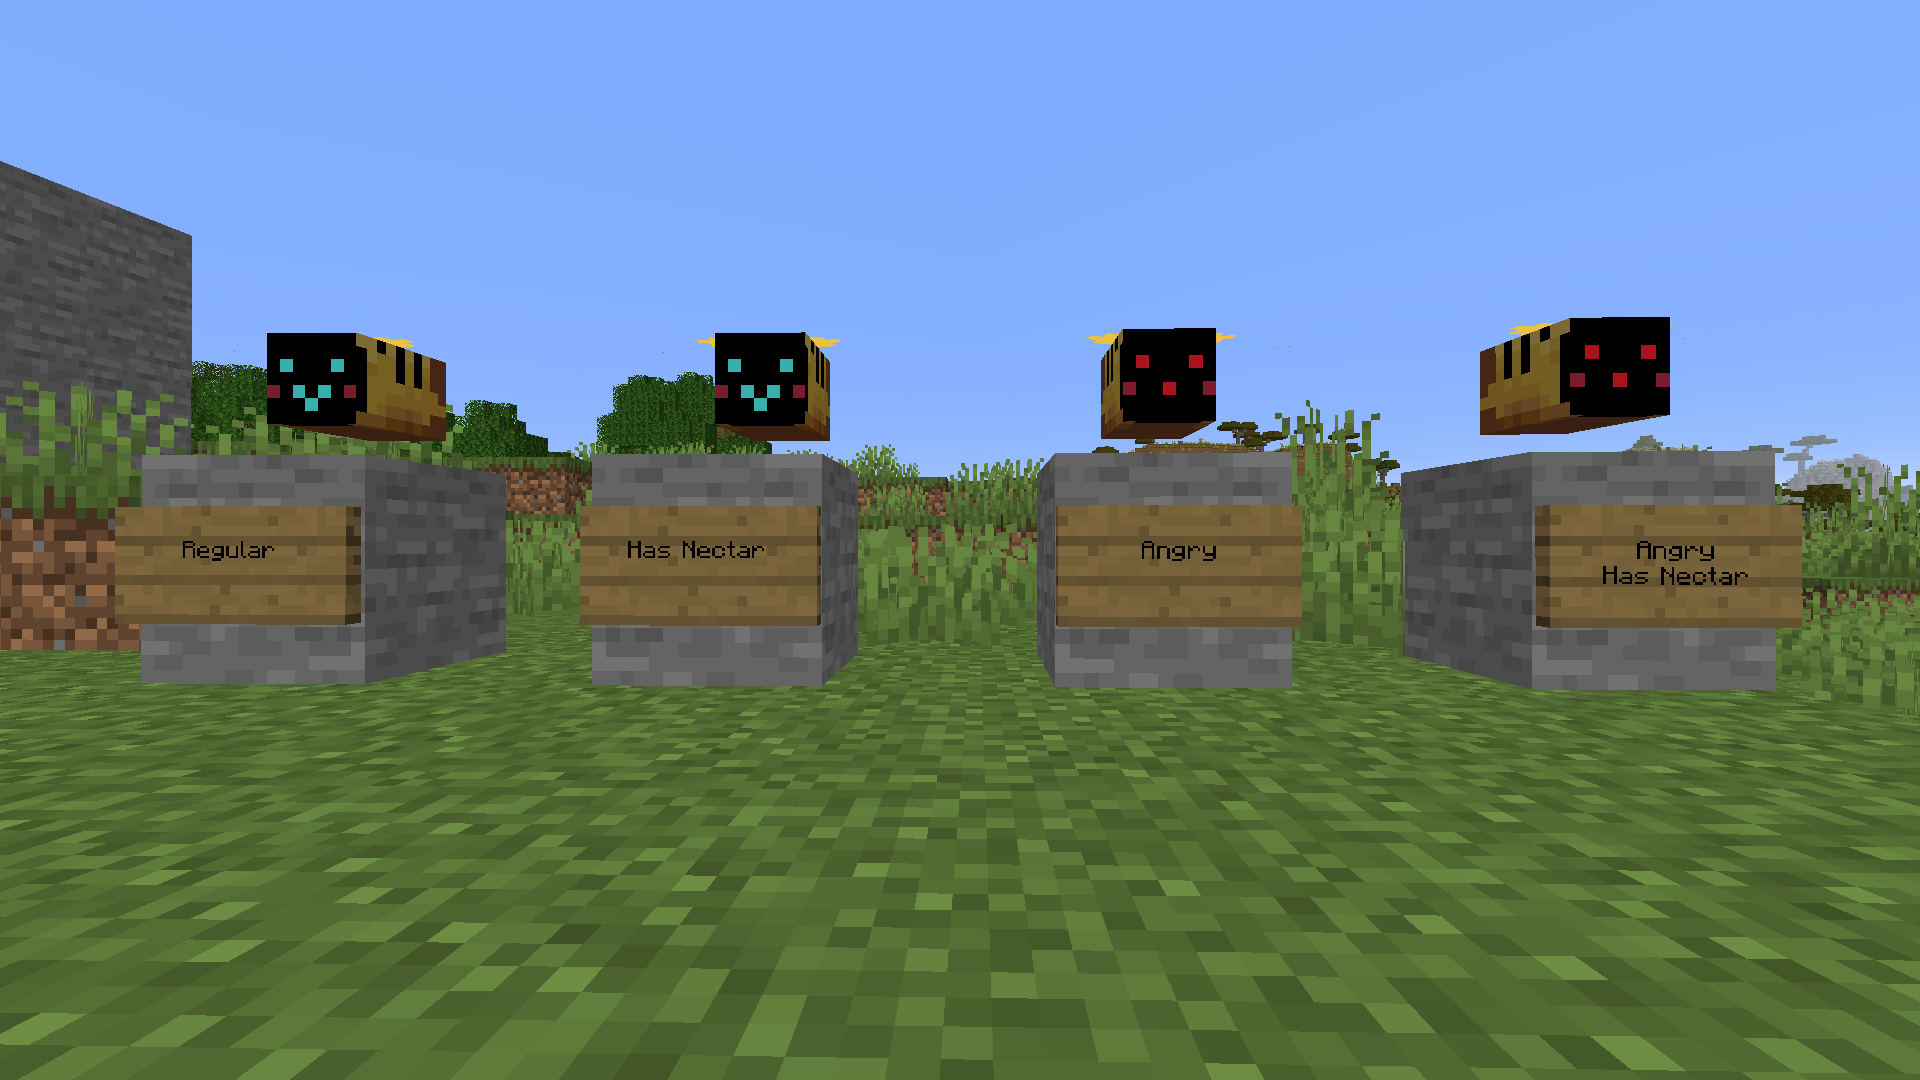 I retextured Minecraft bees to be Drones. I'm not the best